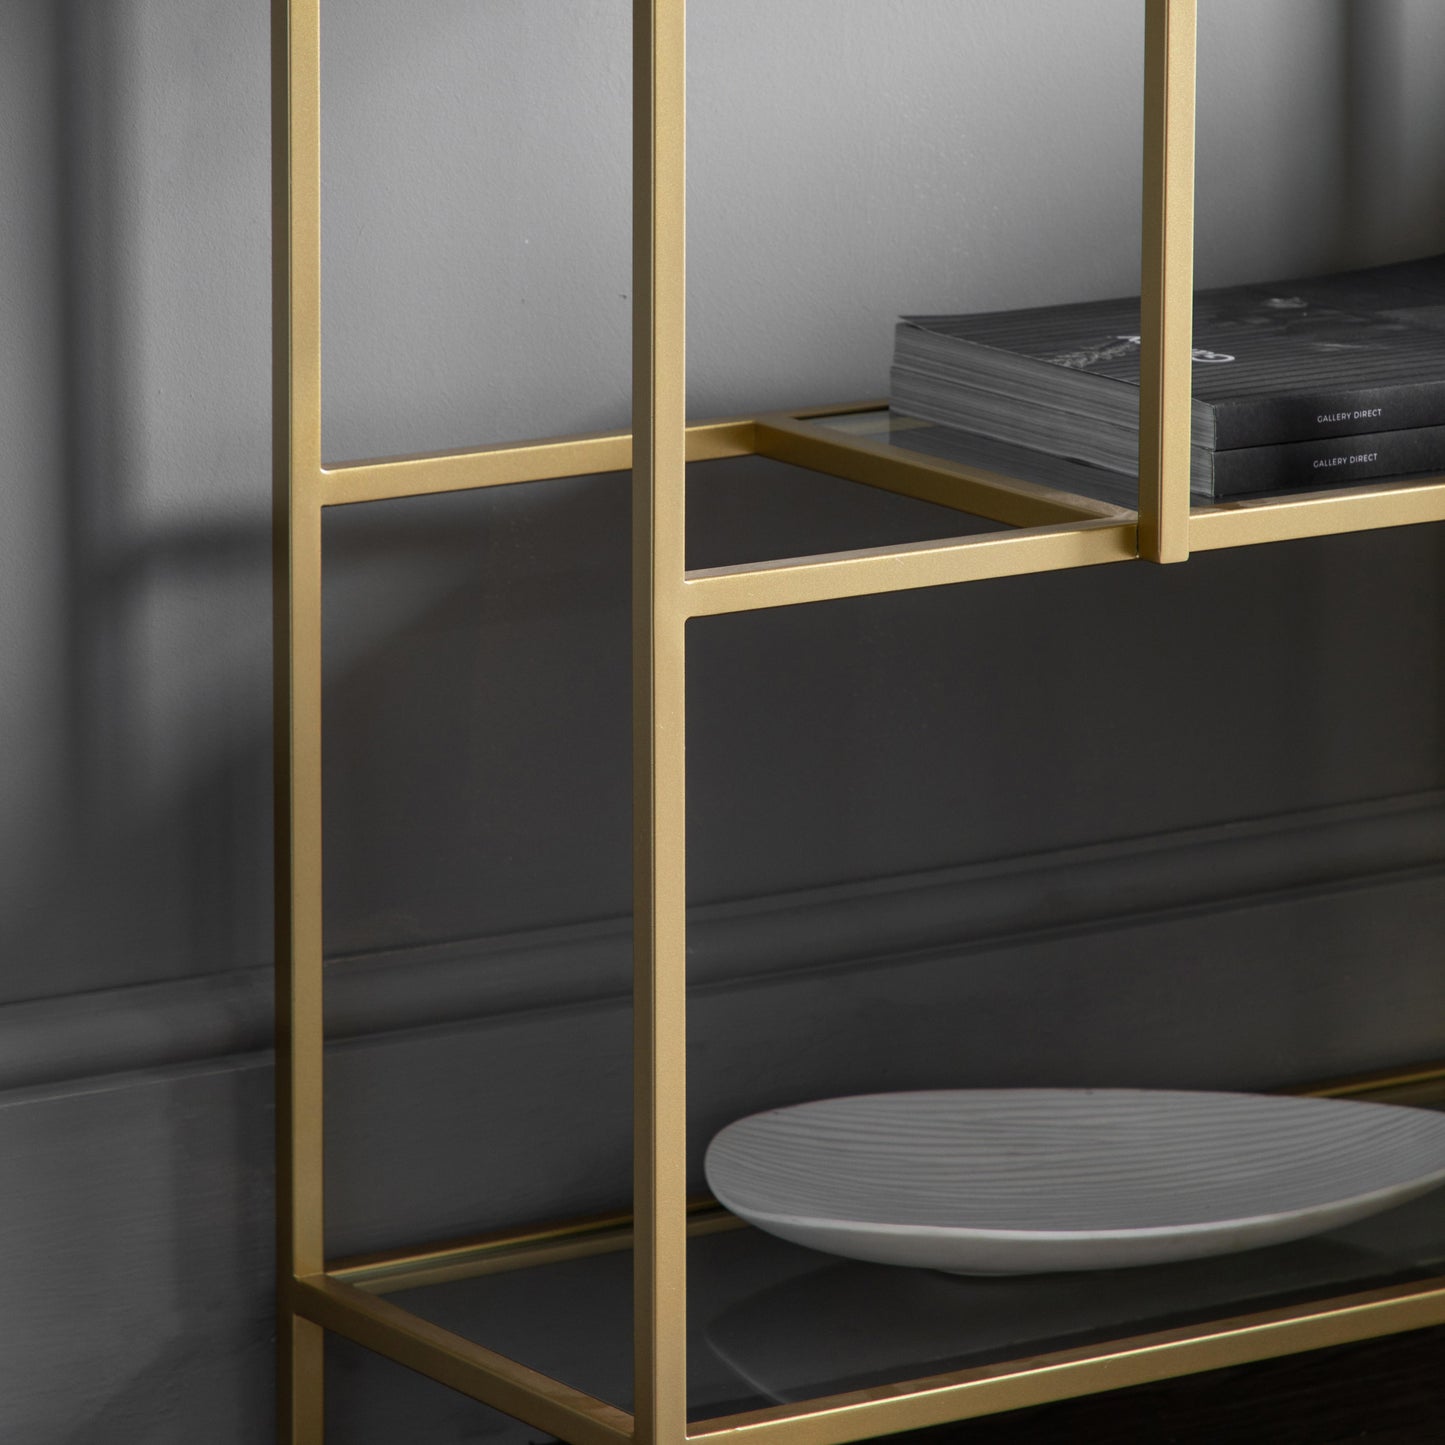 A home furniture display unit from Kikiathome.co.uk featuring a champagne shelf and a plate, perfect for interior decor.